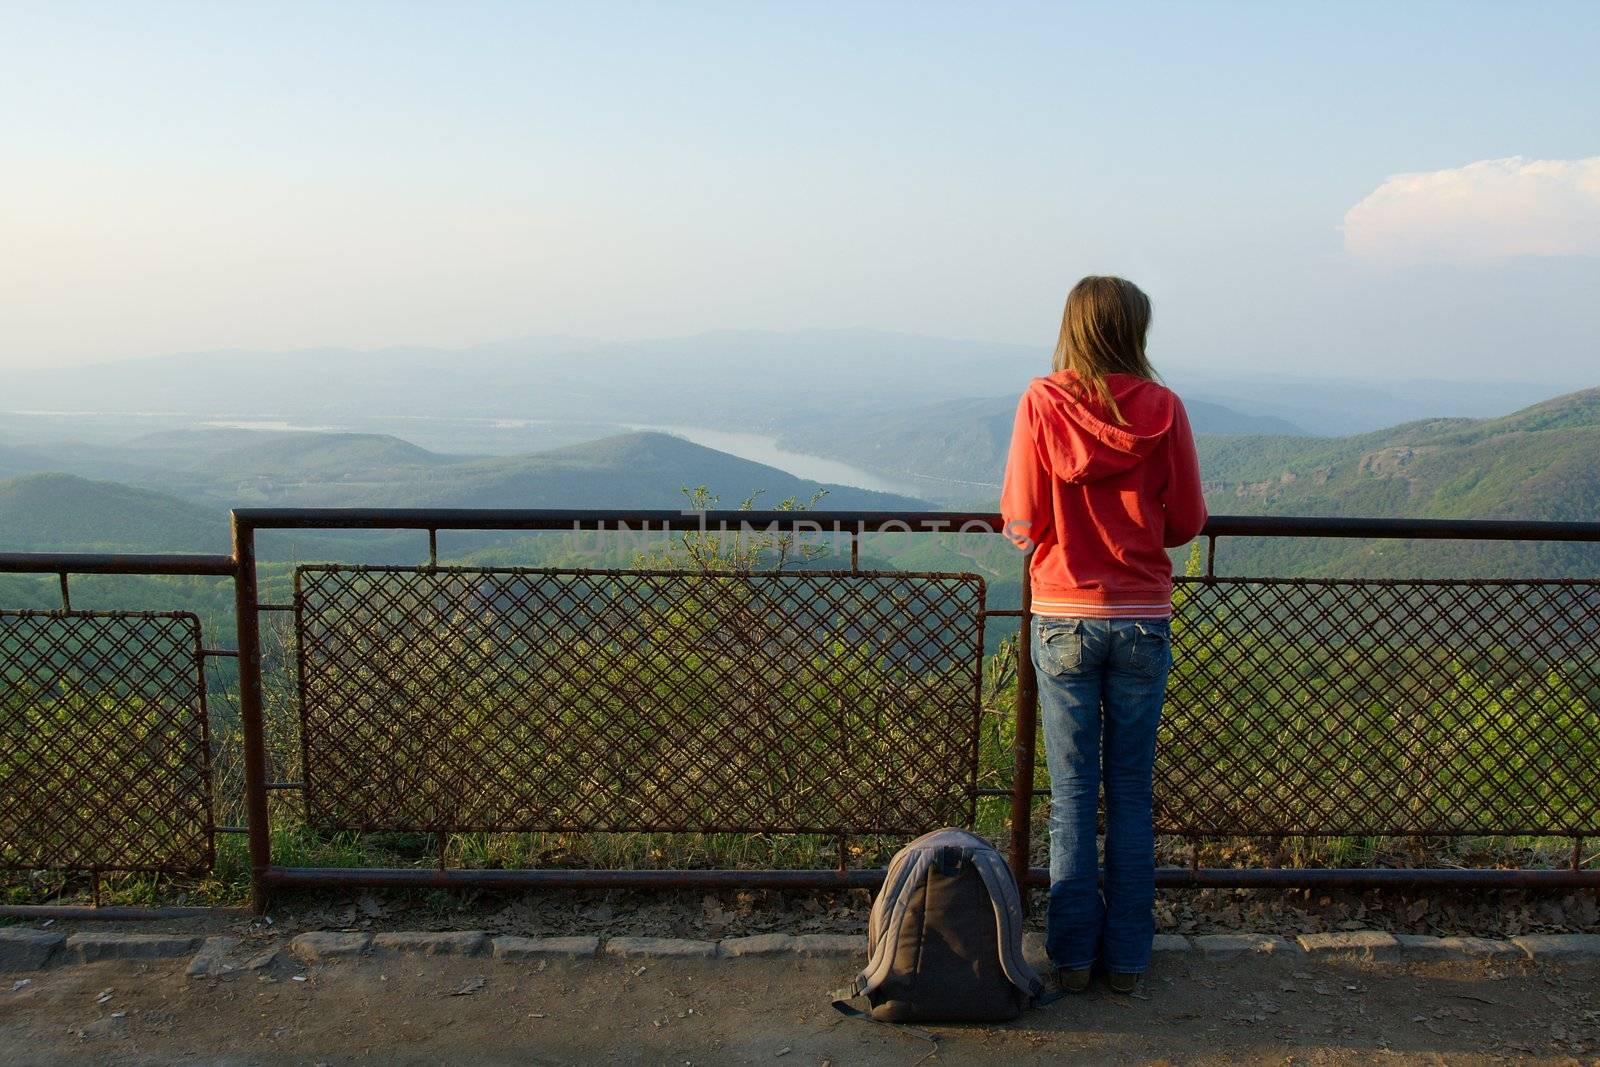 Girl enjoying the view on the landscape